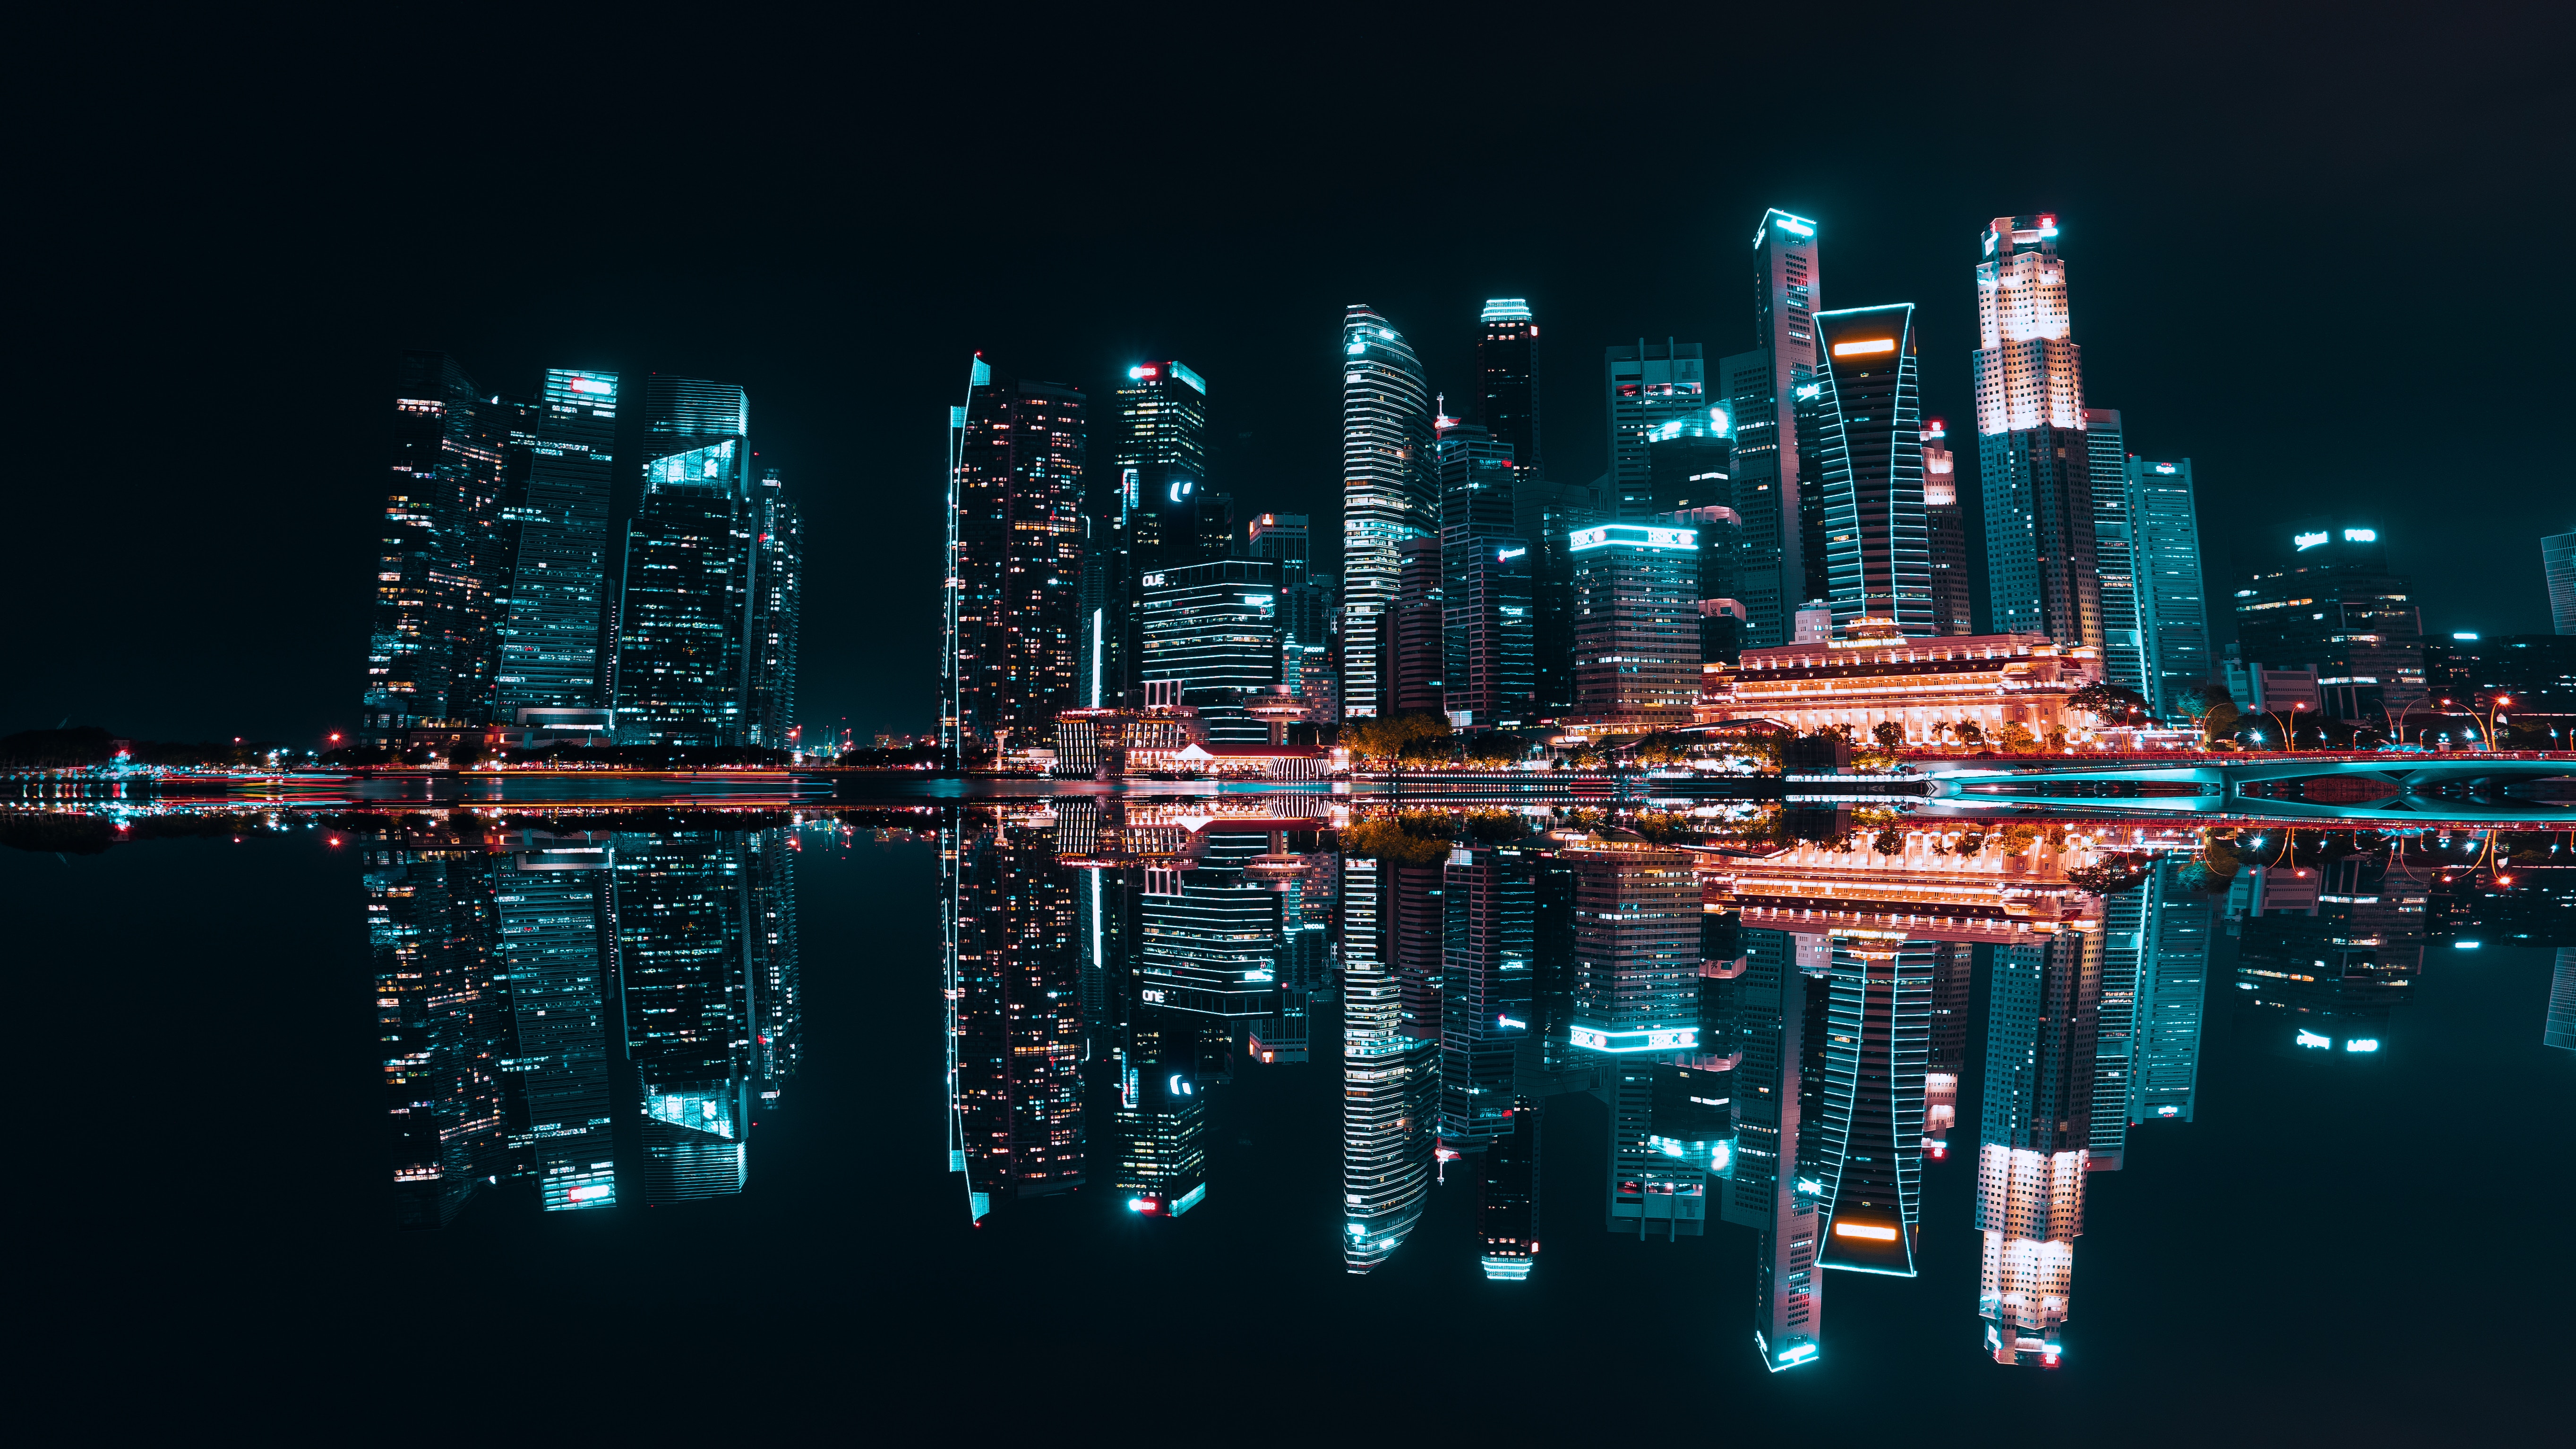 night city, illumination, lake, cities, building, reflection, skyscrapers, backlight, electricity images